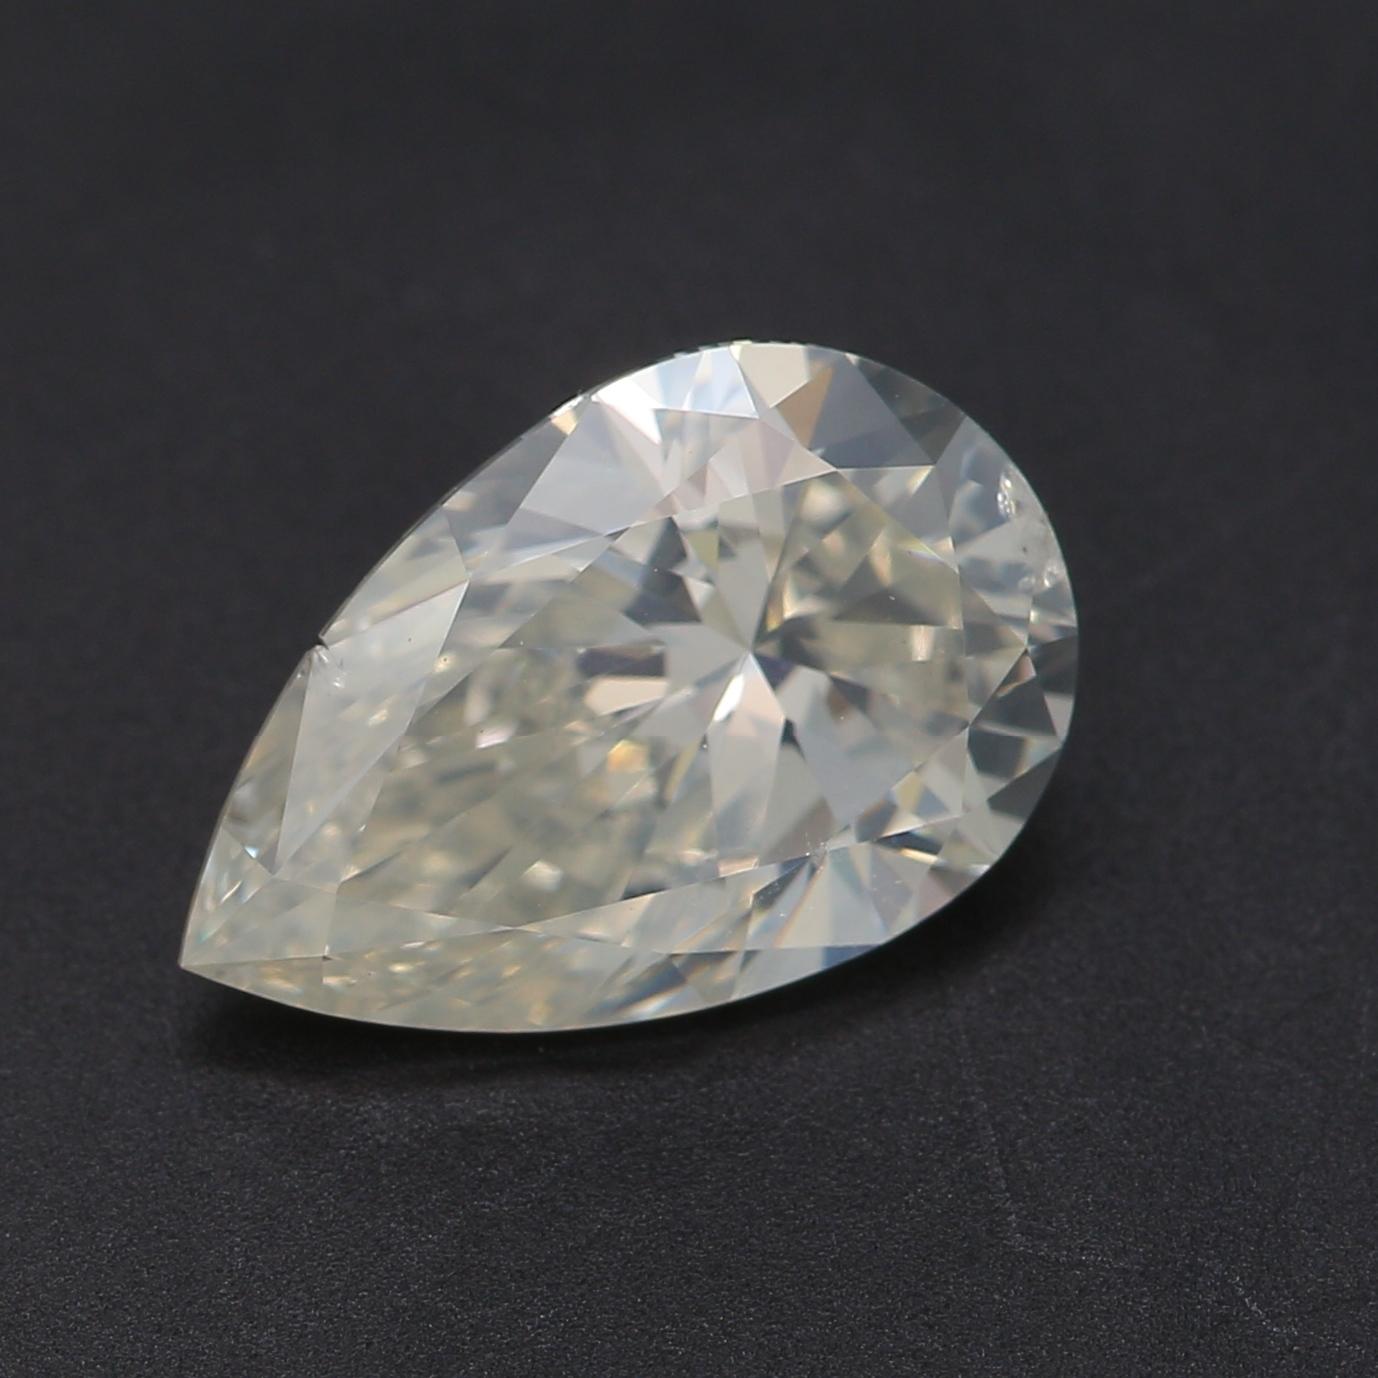 *100% NATURAL FANCY COLOUR DIAMOND*

✪ Diamond Details ✪

➛ Shape: Pear
➛ Colour Grade: I
➛ Carat: 1.50
➛ Clarity: SI2
➛ GIA Certified 

^FEATURES OF THE DIAMOND^

This 1.5-carat diamond is a measure of weight, equivalent to 0.3 grams. In terms of